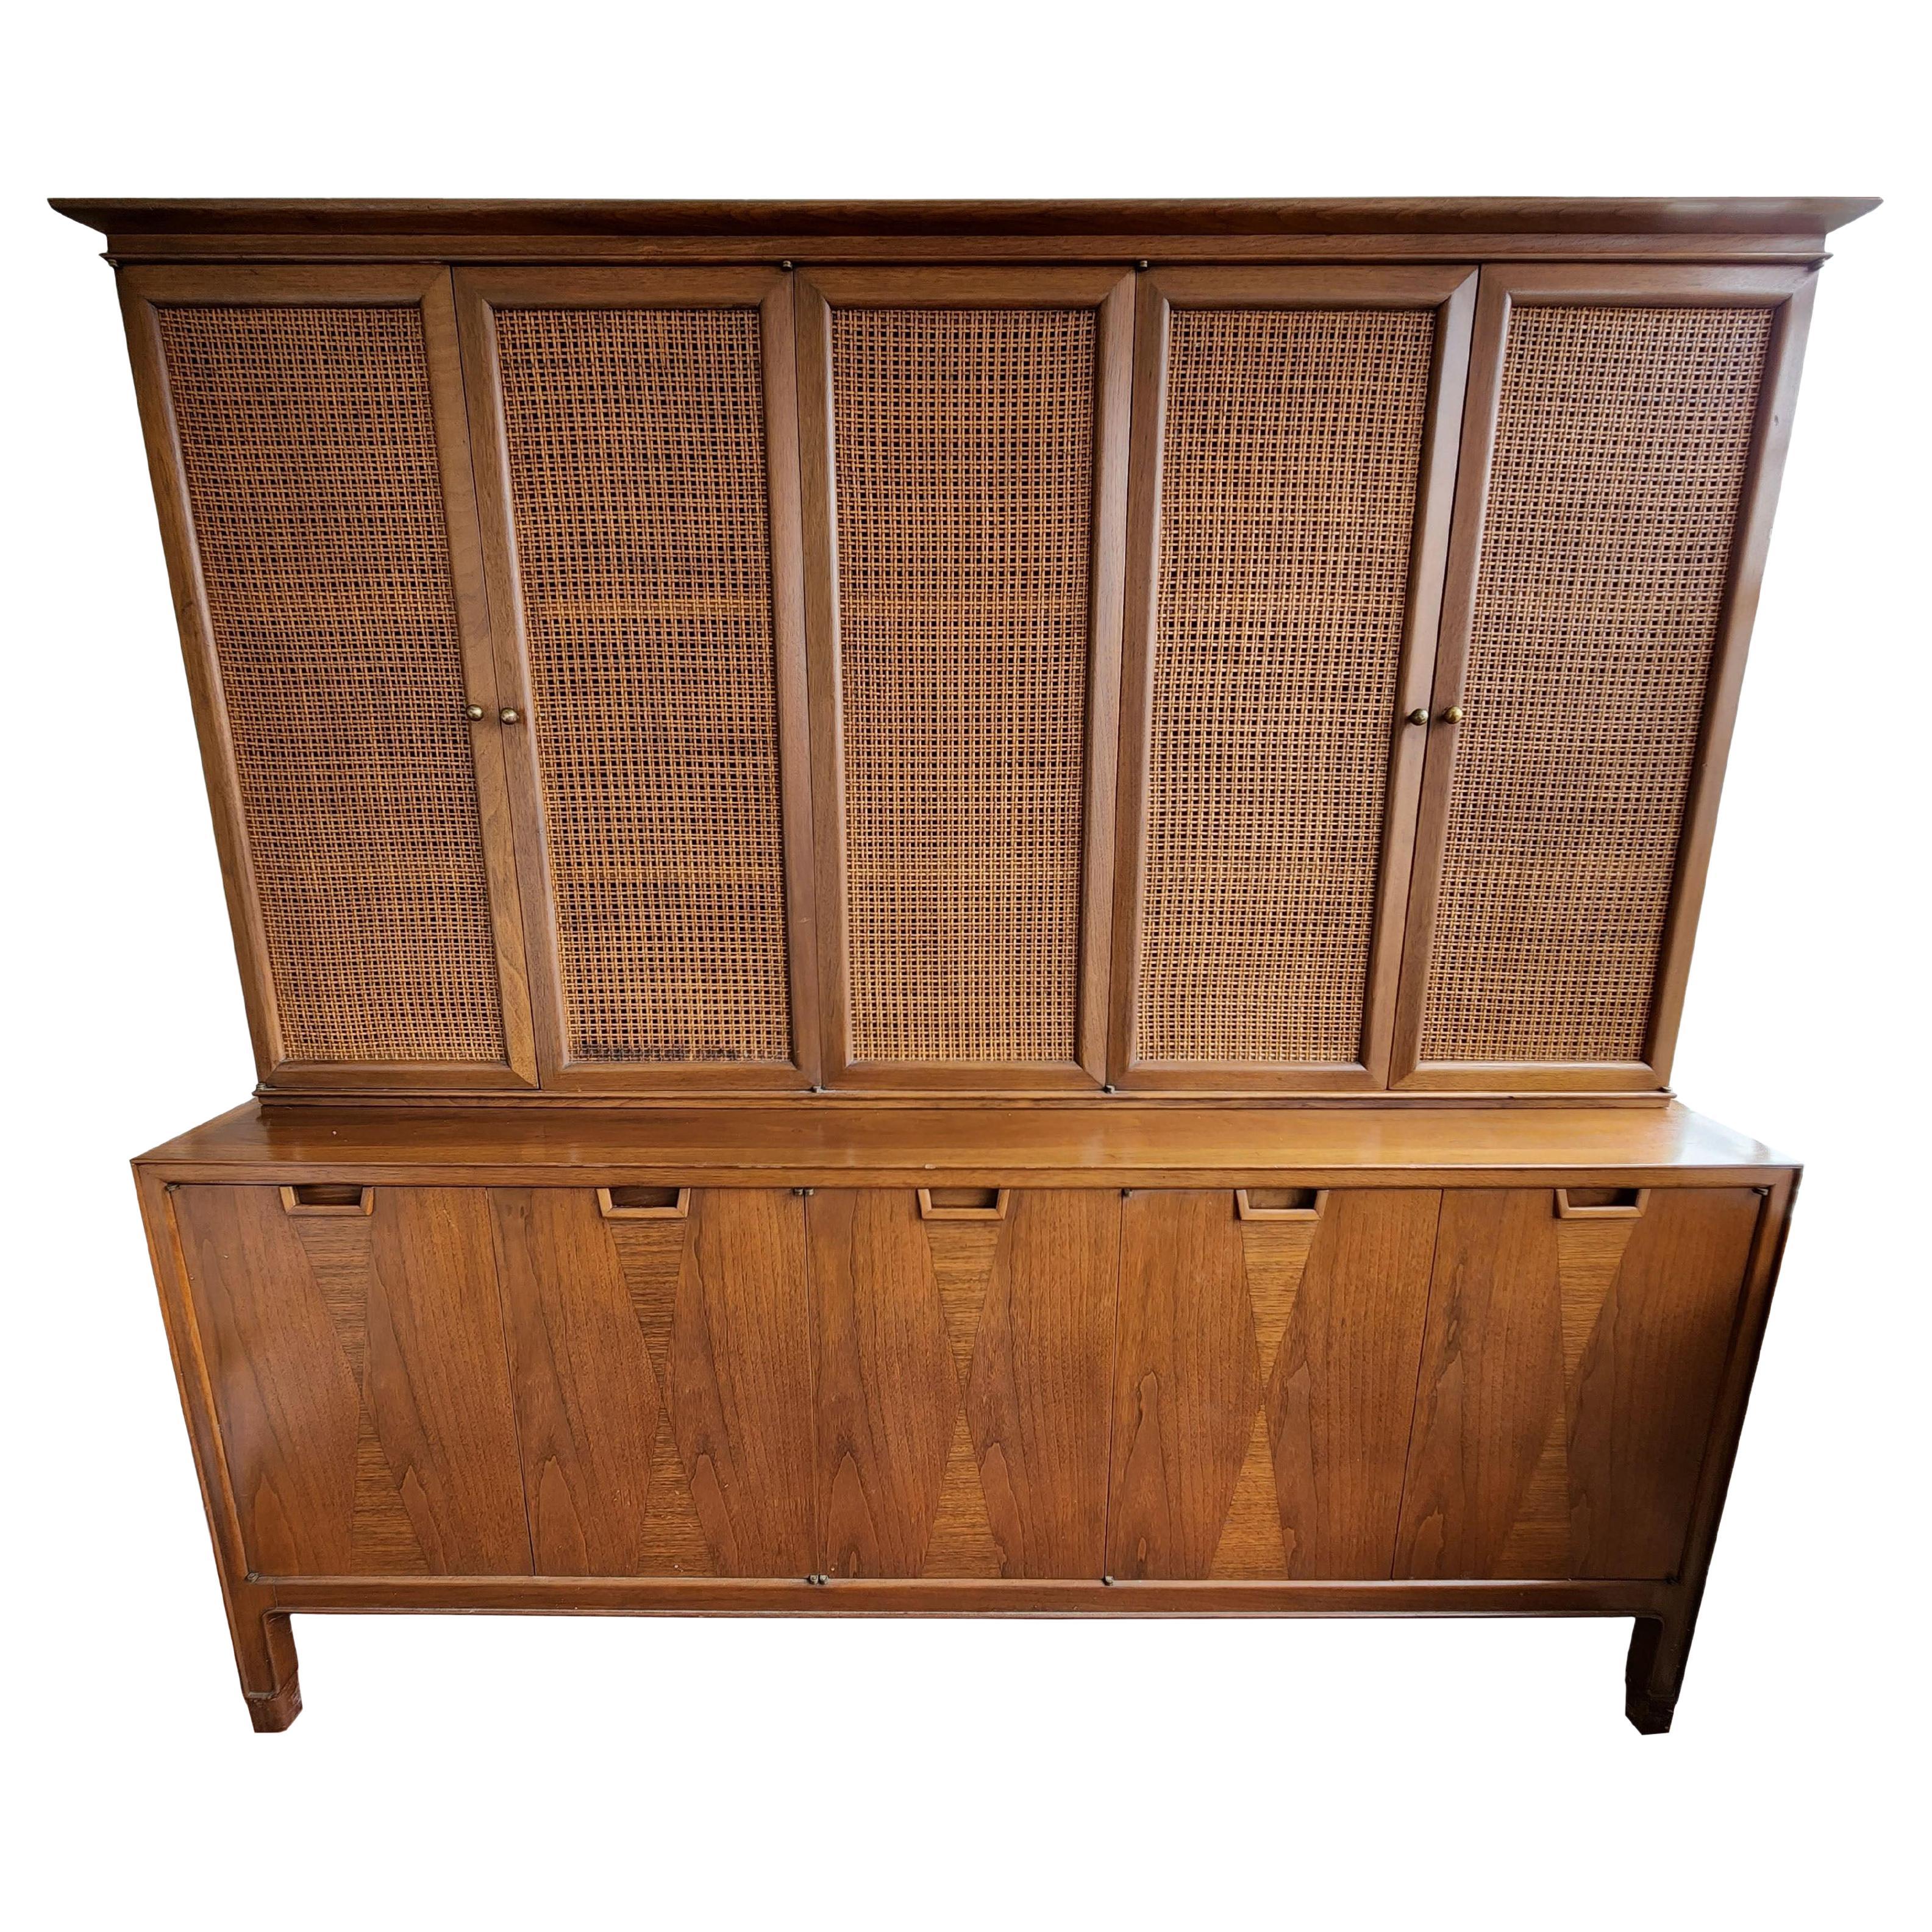 Mid-Century Modern Janus Collection Mount Airy Sideboard Hutch by John Stuart